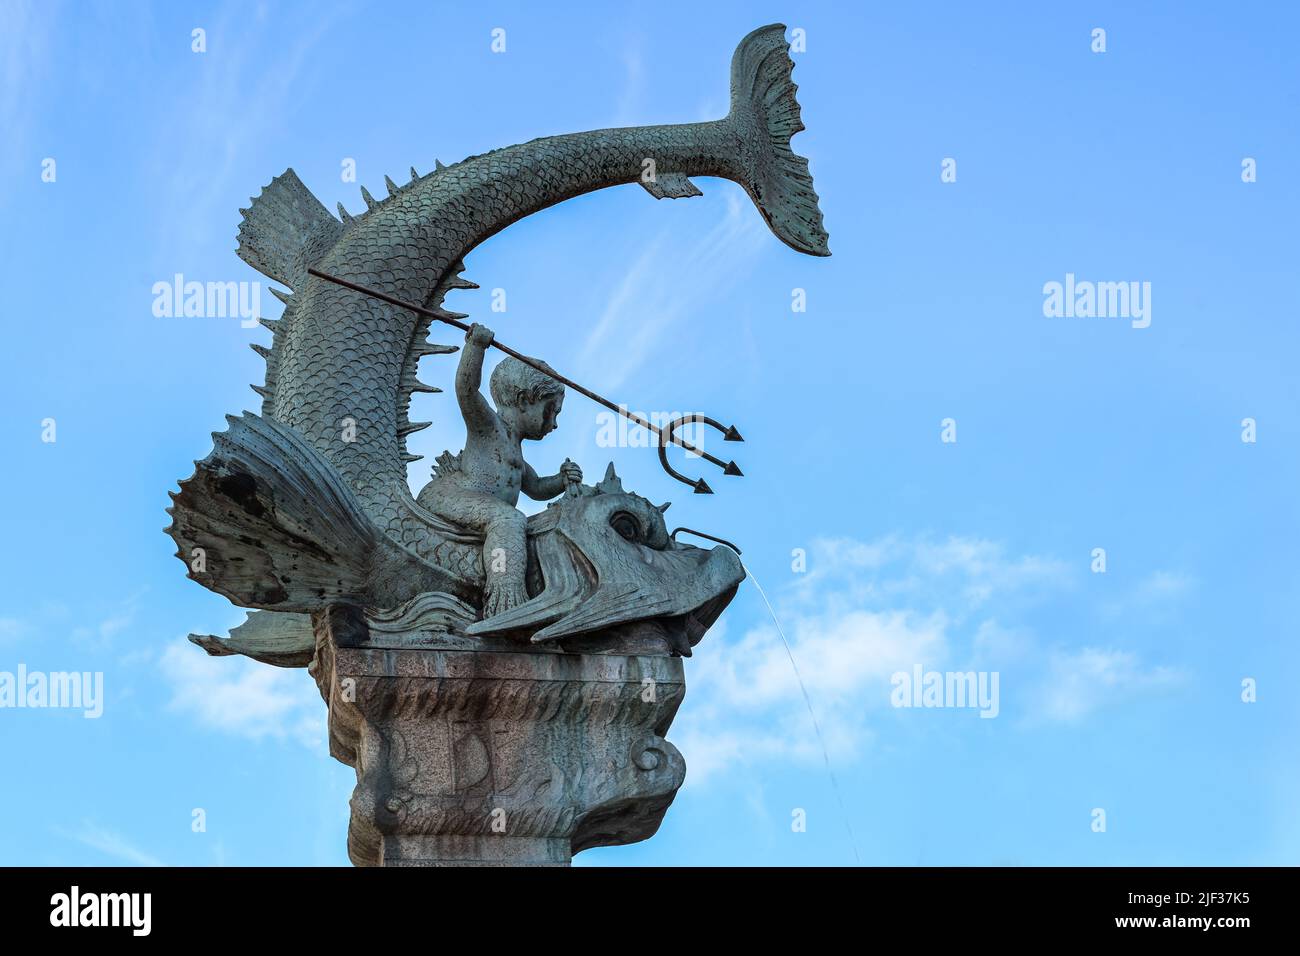 Triton fountain part in the city of Duisburg, Germany, son of Poseidon with a trident sitting on a big fish against a blue sky with copy space Stock Photo